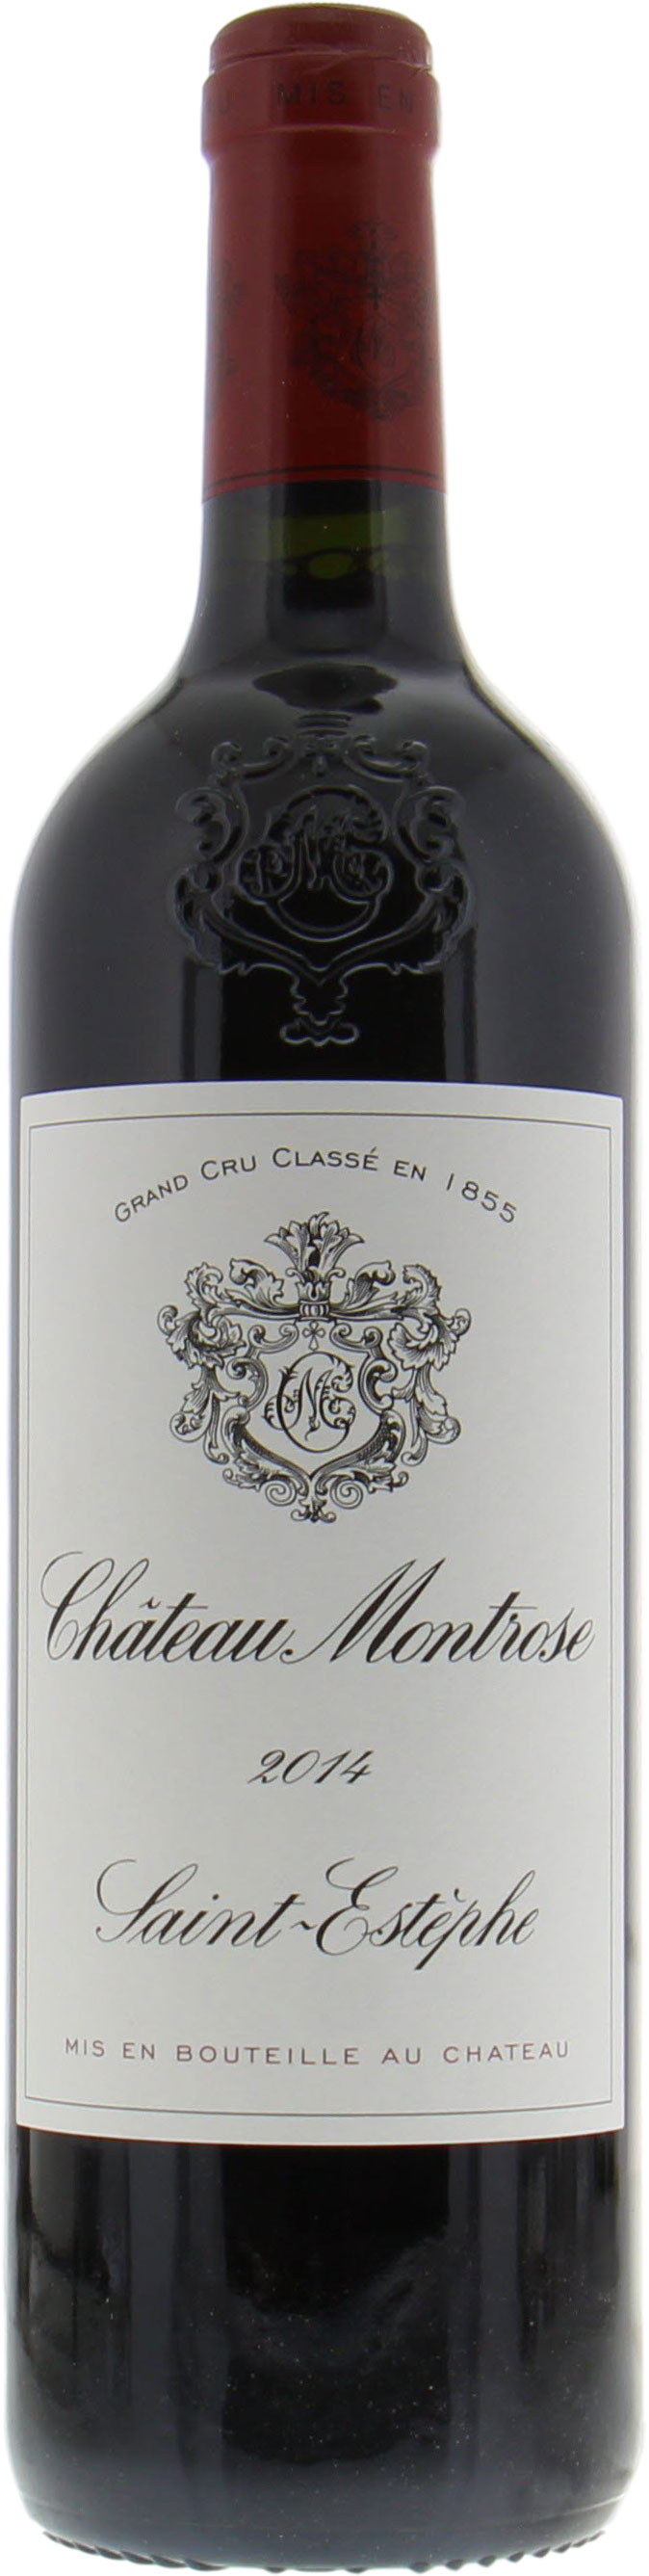 Chateau Montrose 2014 | Buy Online | Best of Wines